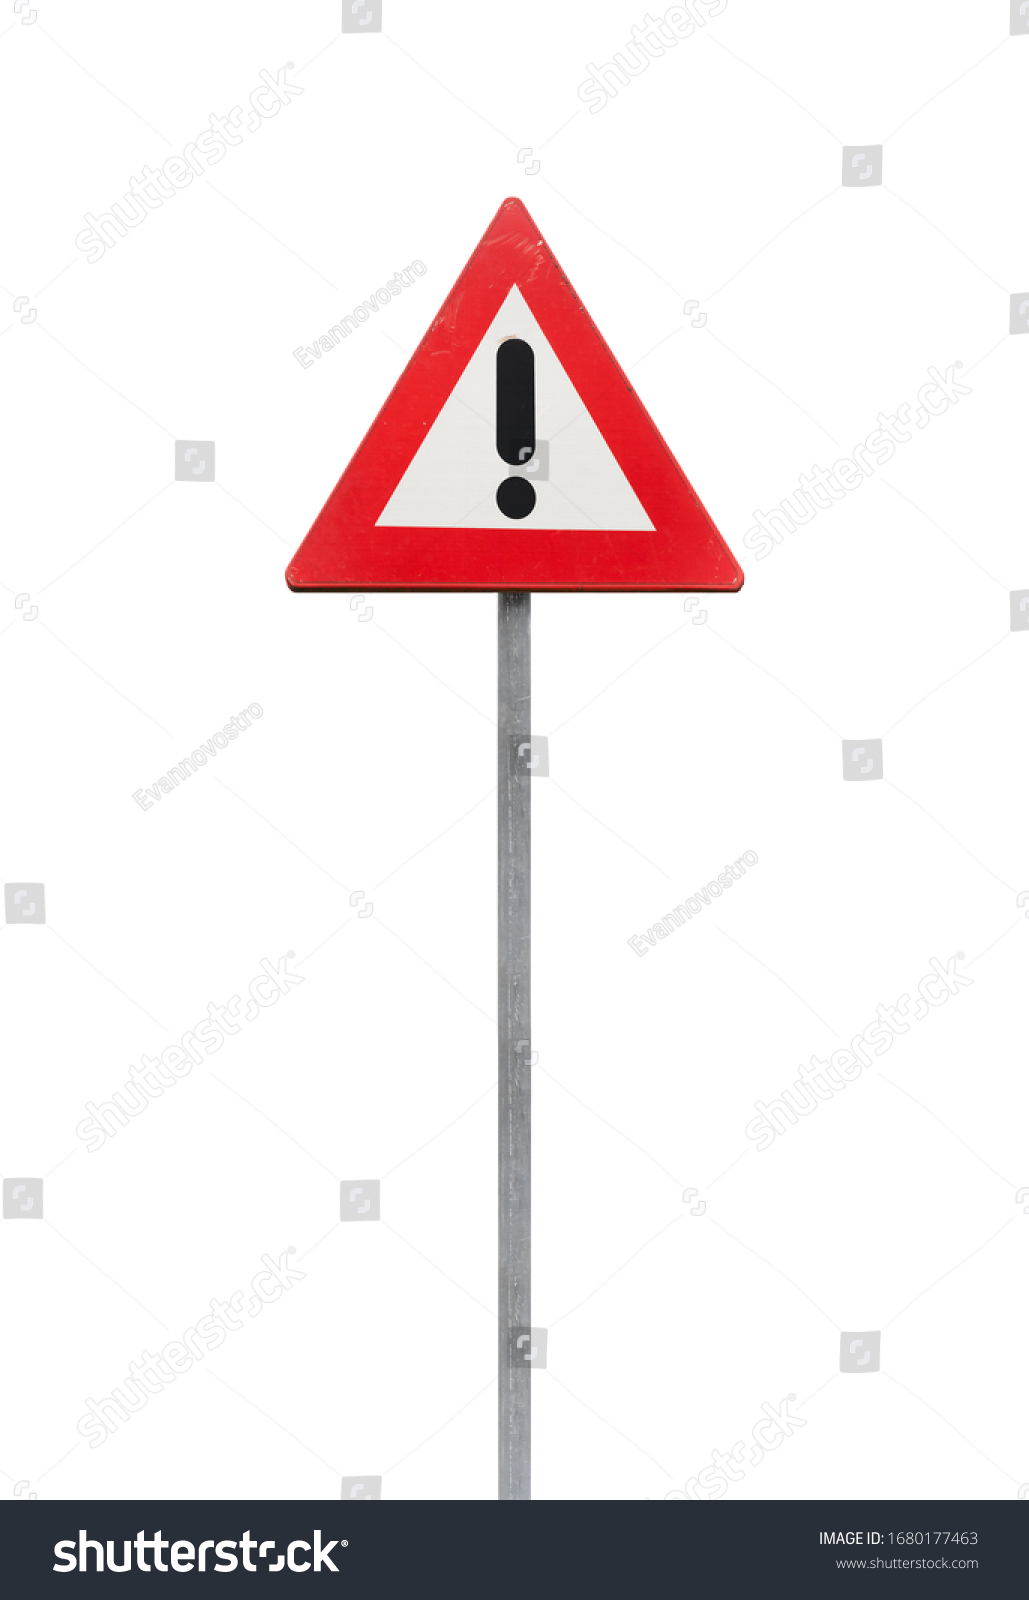 Warning road sign with black exclamation mark in red triangle isolated on white background #1680177463